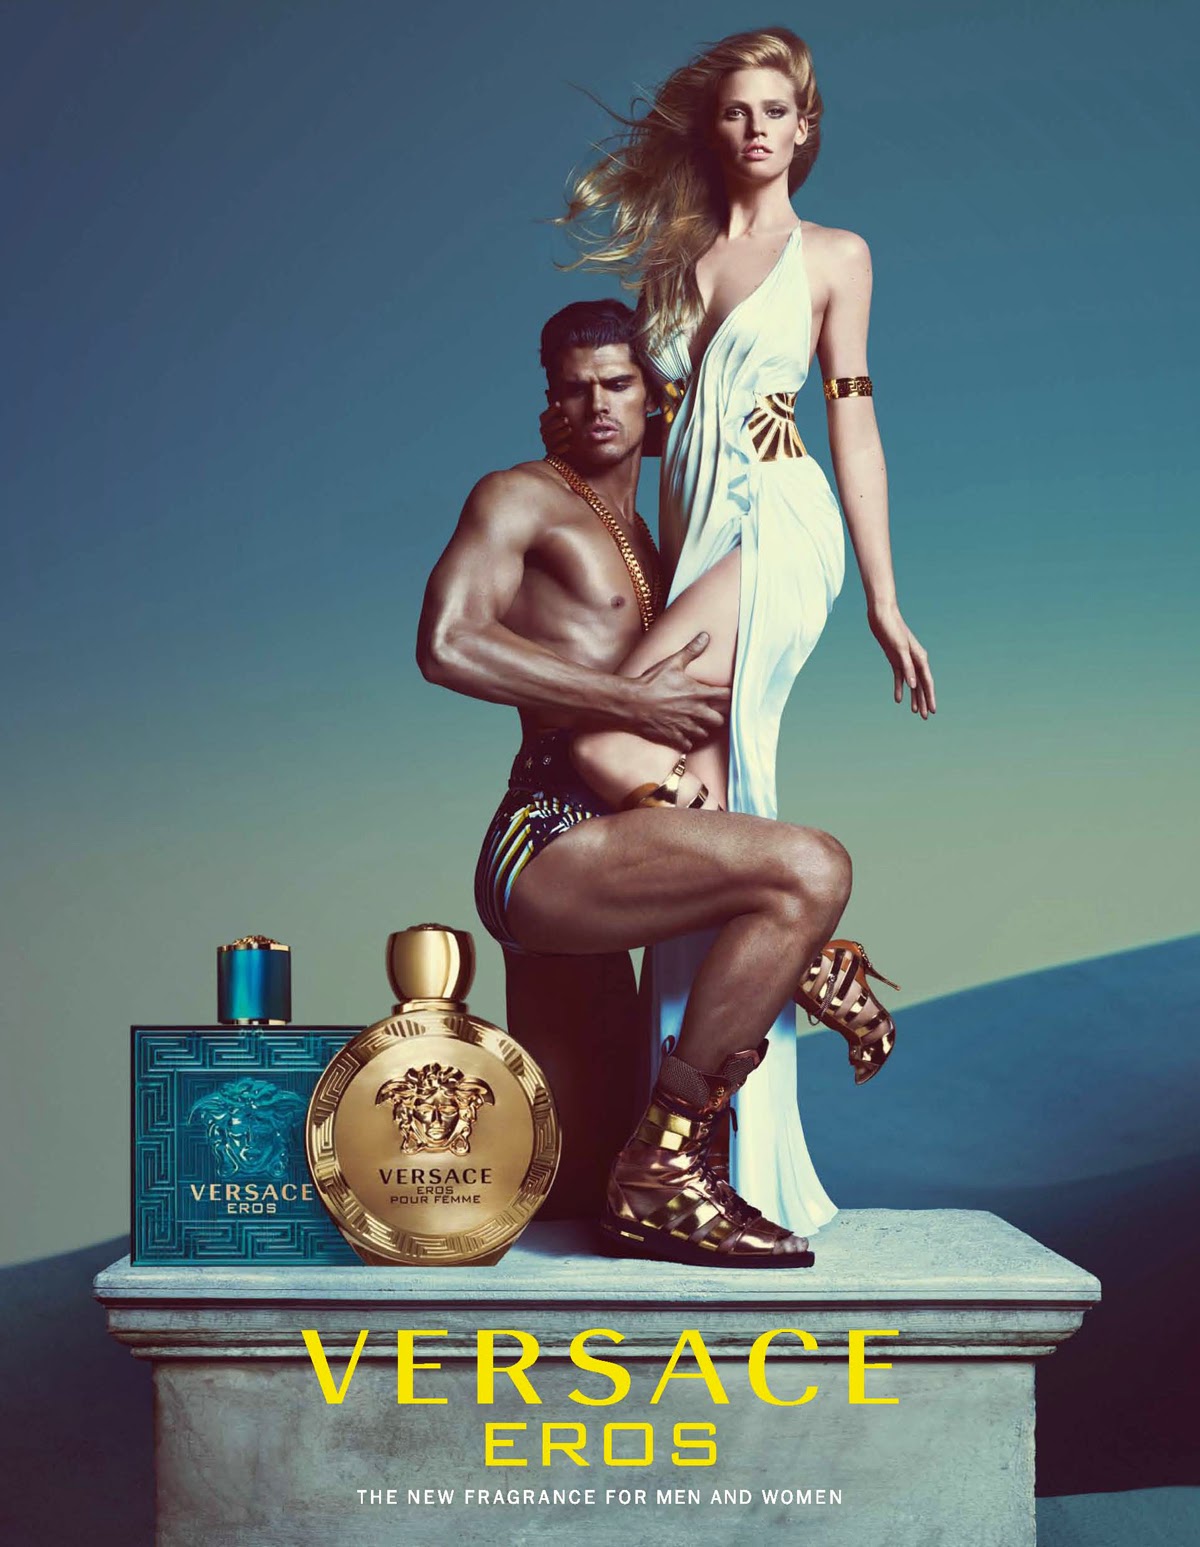 Watch: Versace's Steamy, Homoerotic Short Film for Newest Fragrance